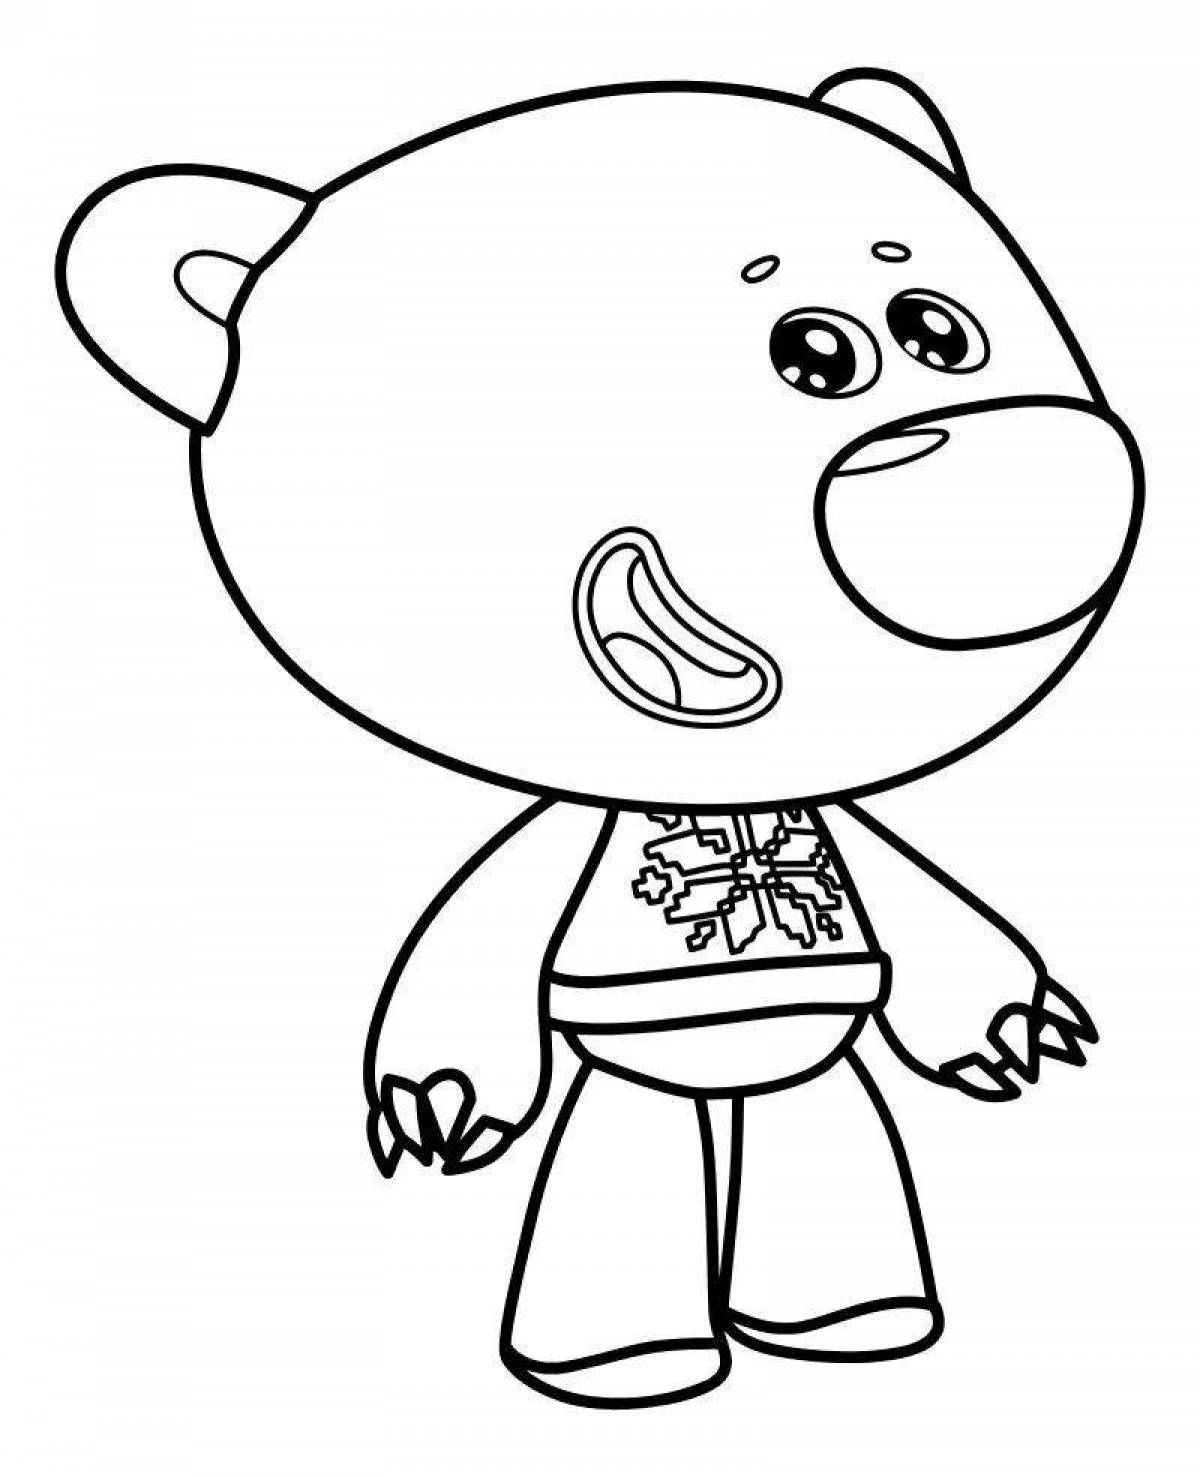 Coloring bears for girls